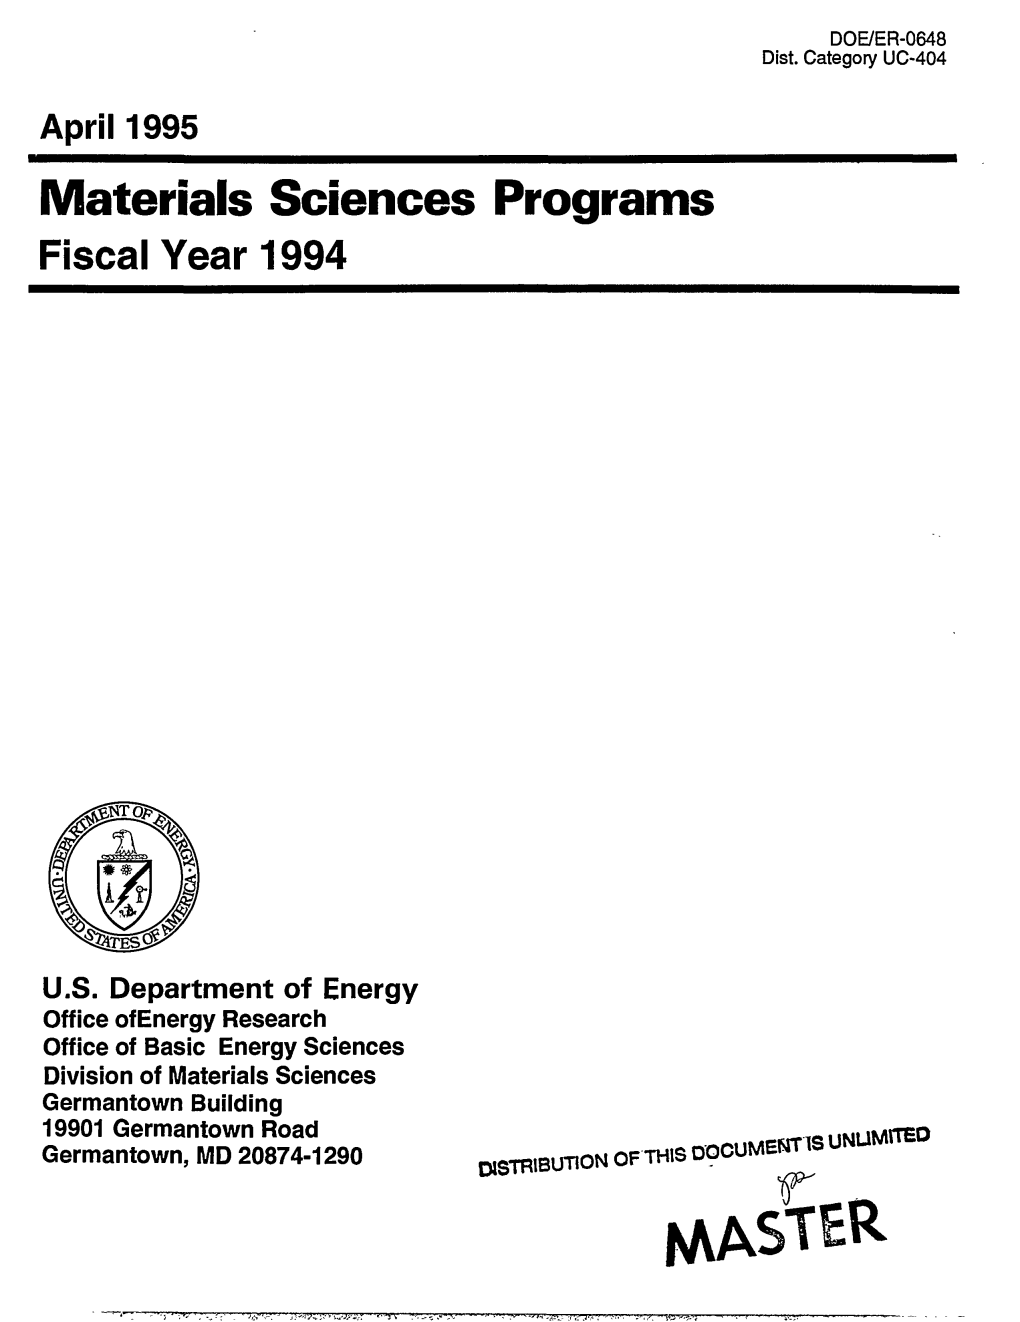 Materials Sciences Programs Fiscal Year 1994